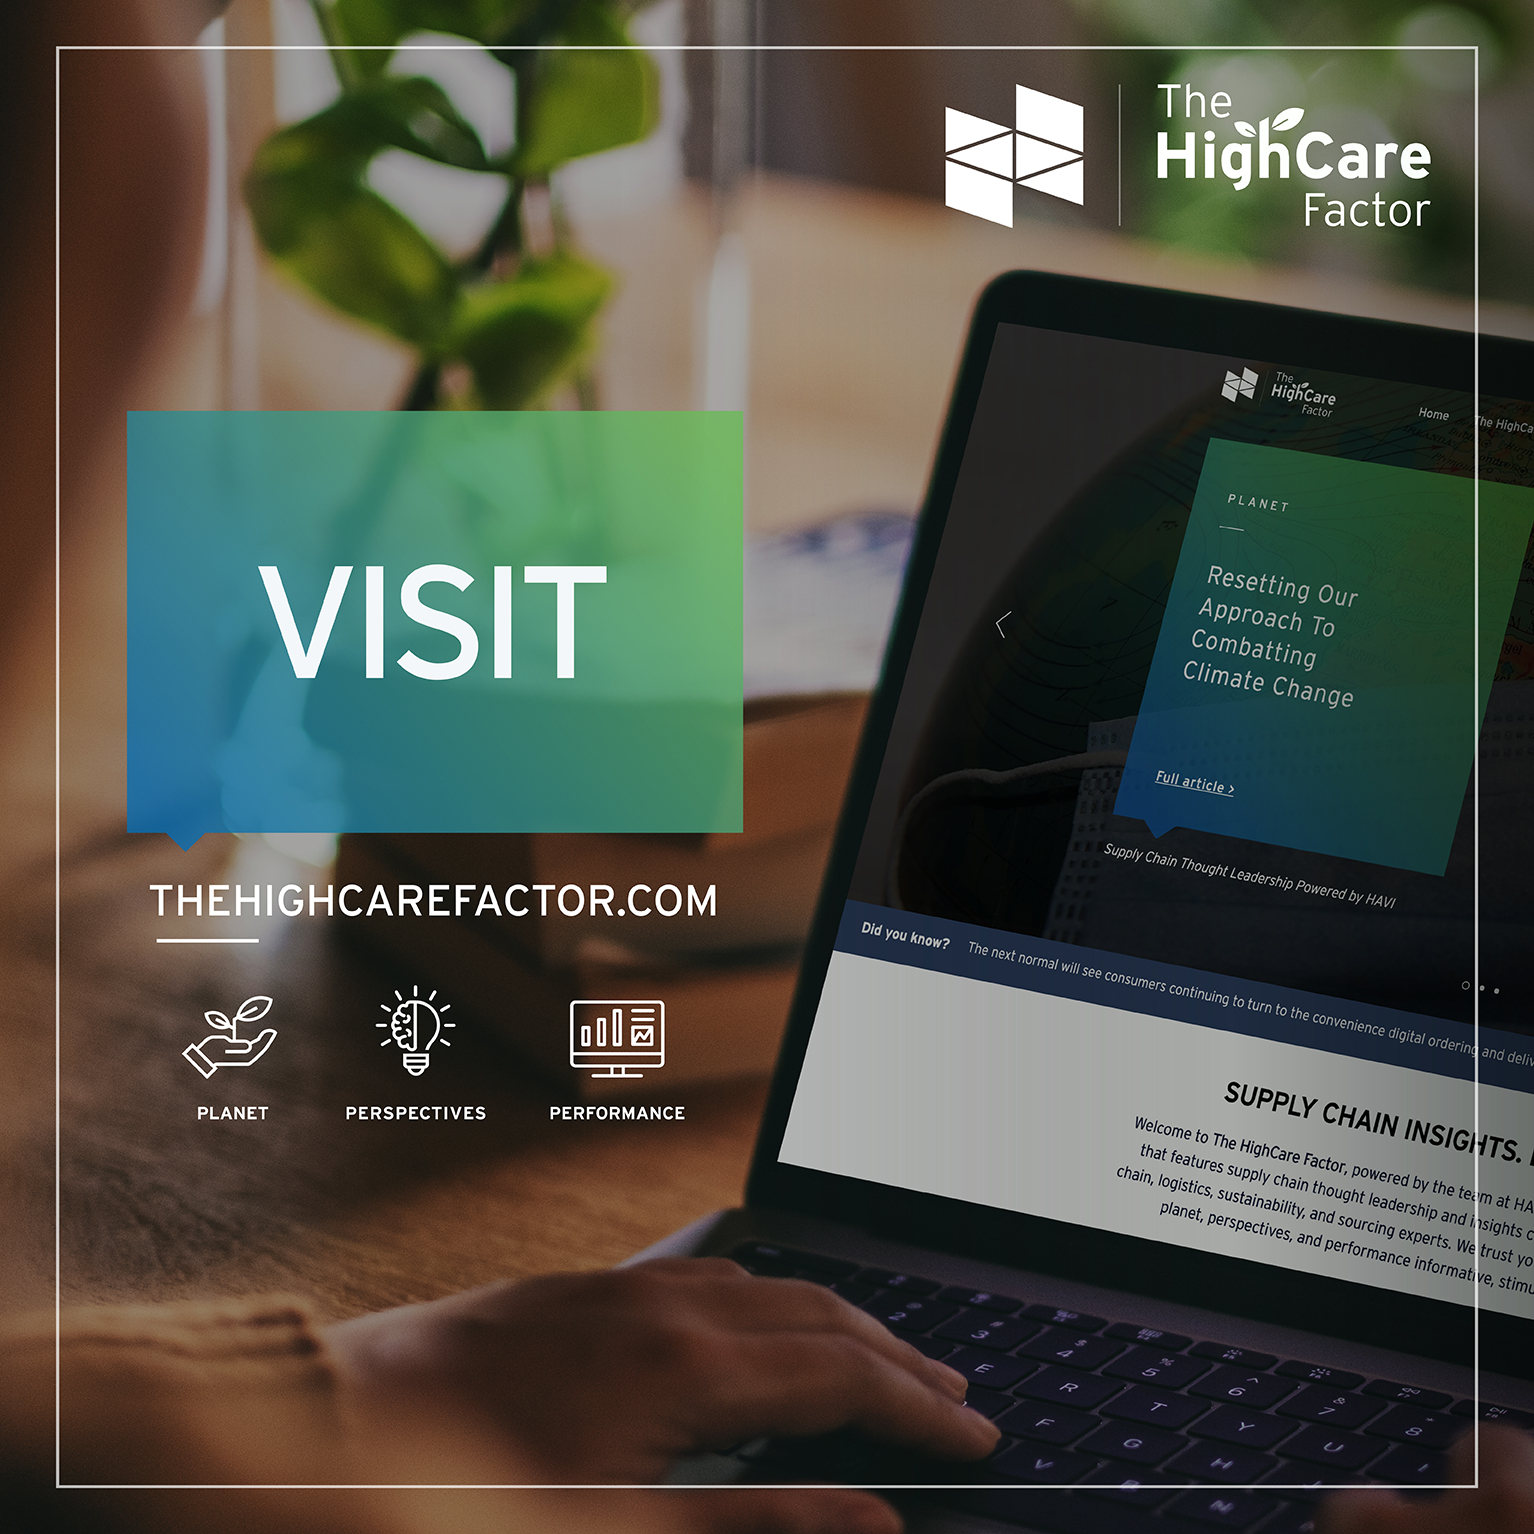 VISIT THE HIGHCARE FACTOR